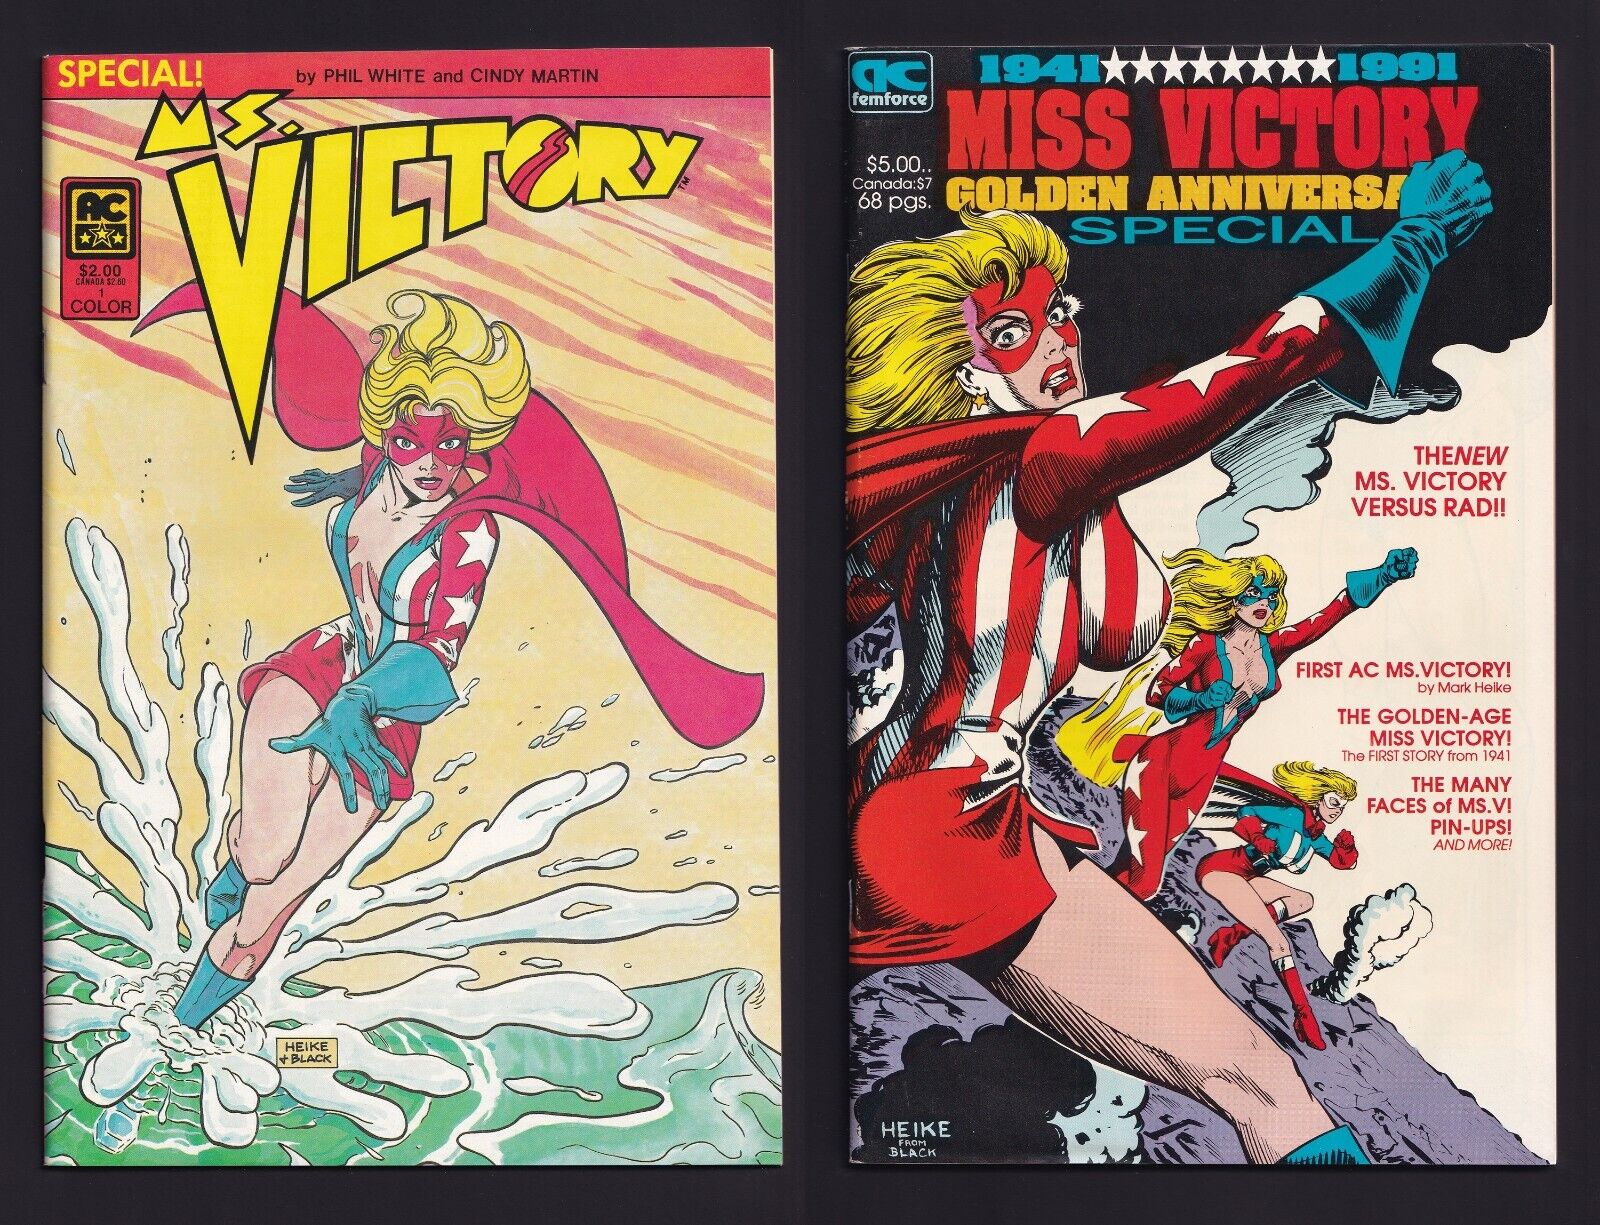 Ms. Victory Special #1/Miss Victory Golden Anniversary Special #1 AC Comics 1985